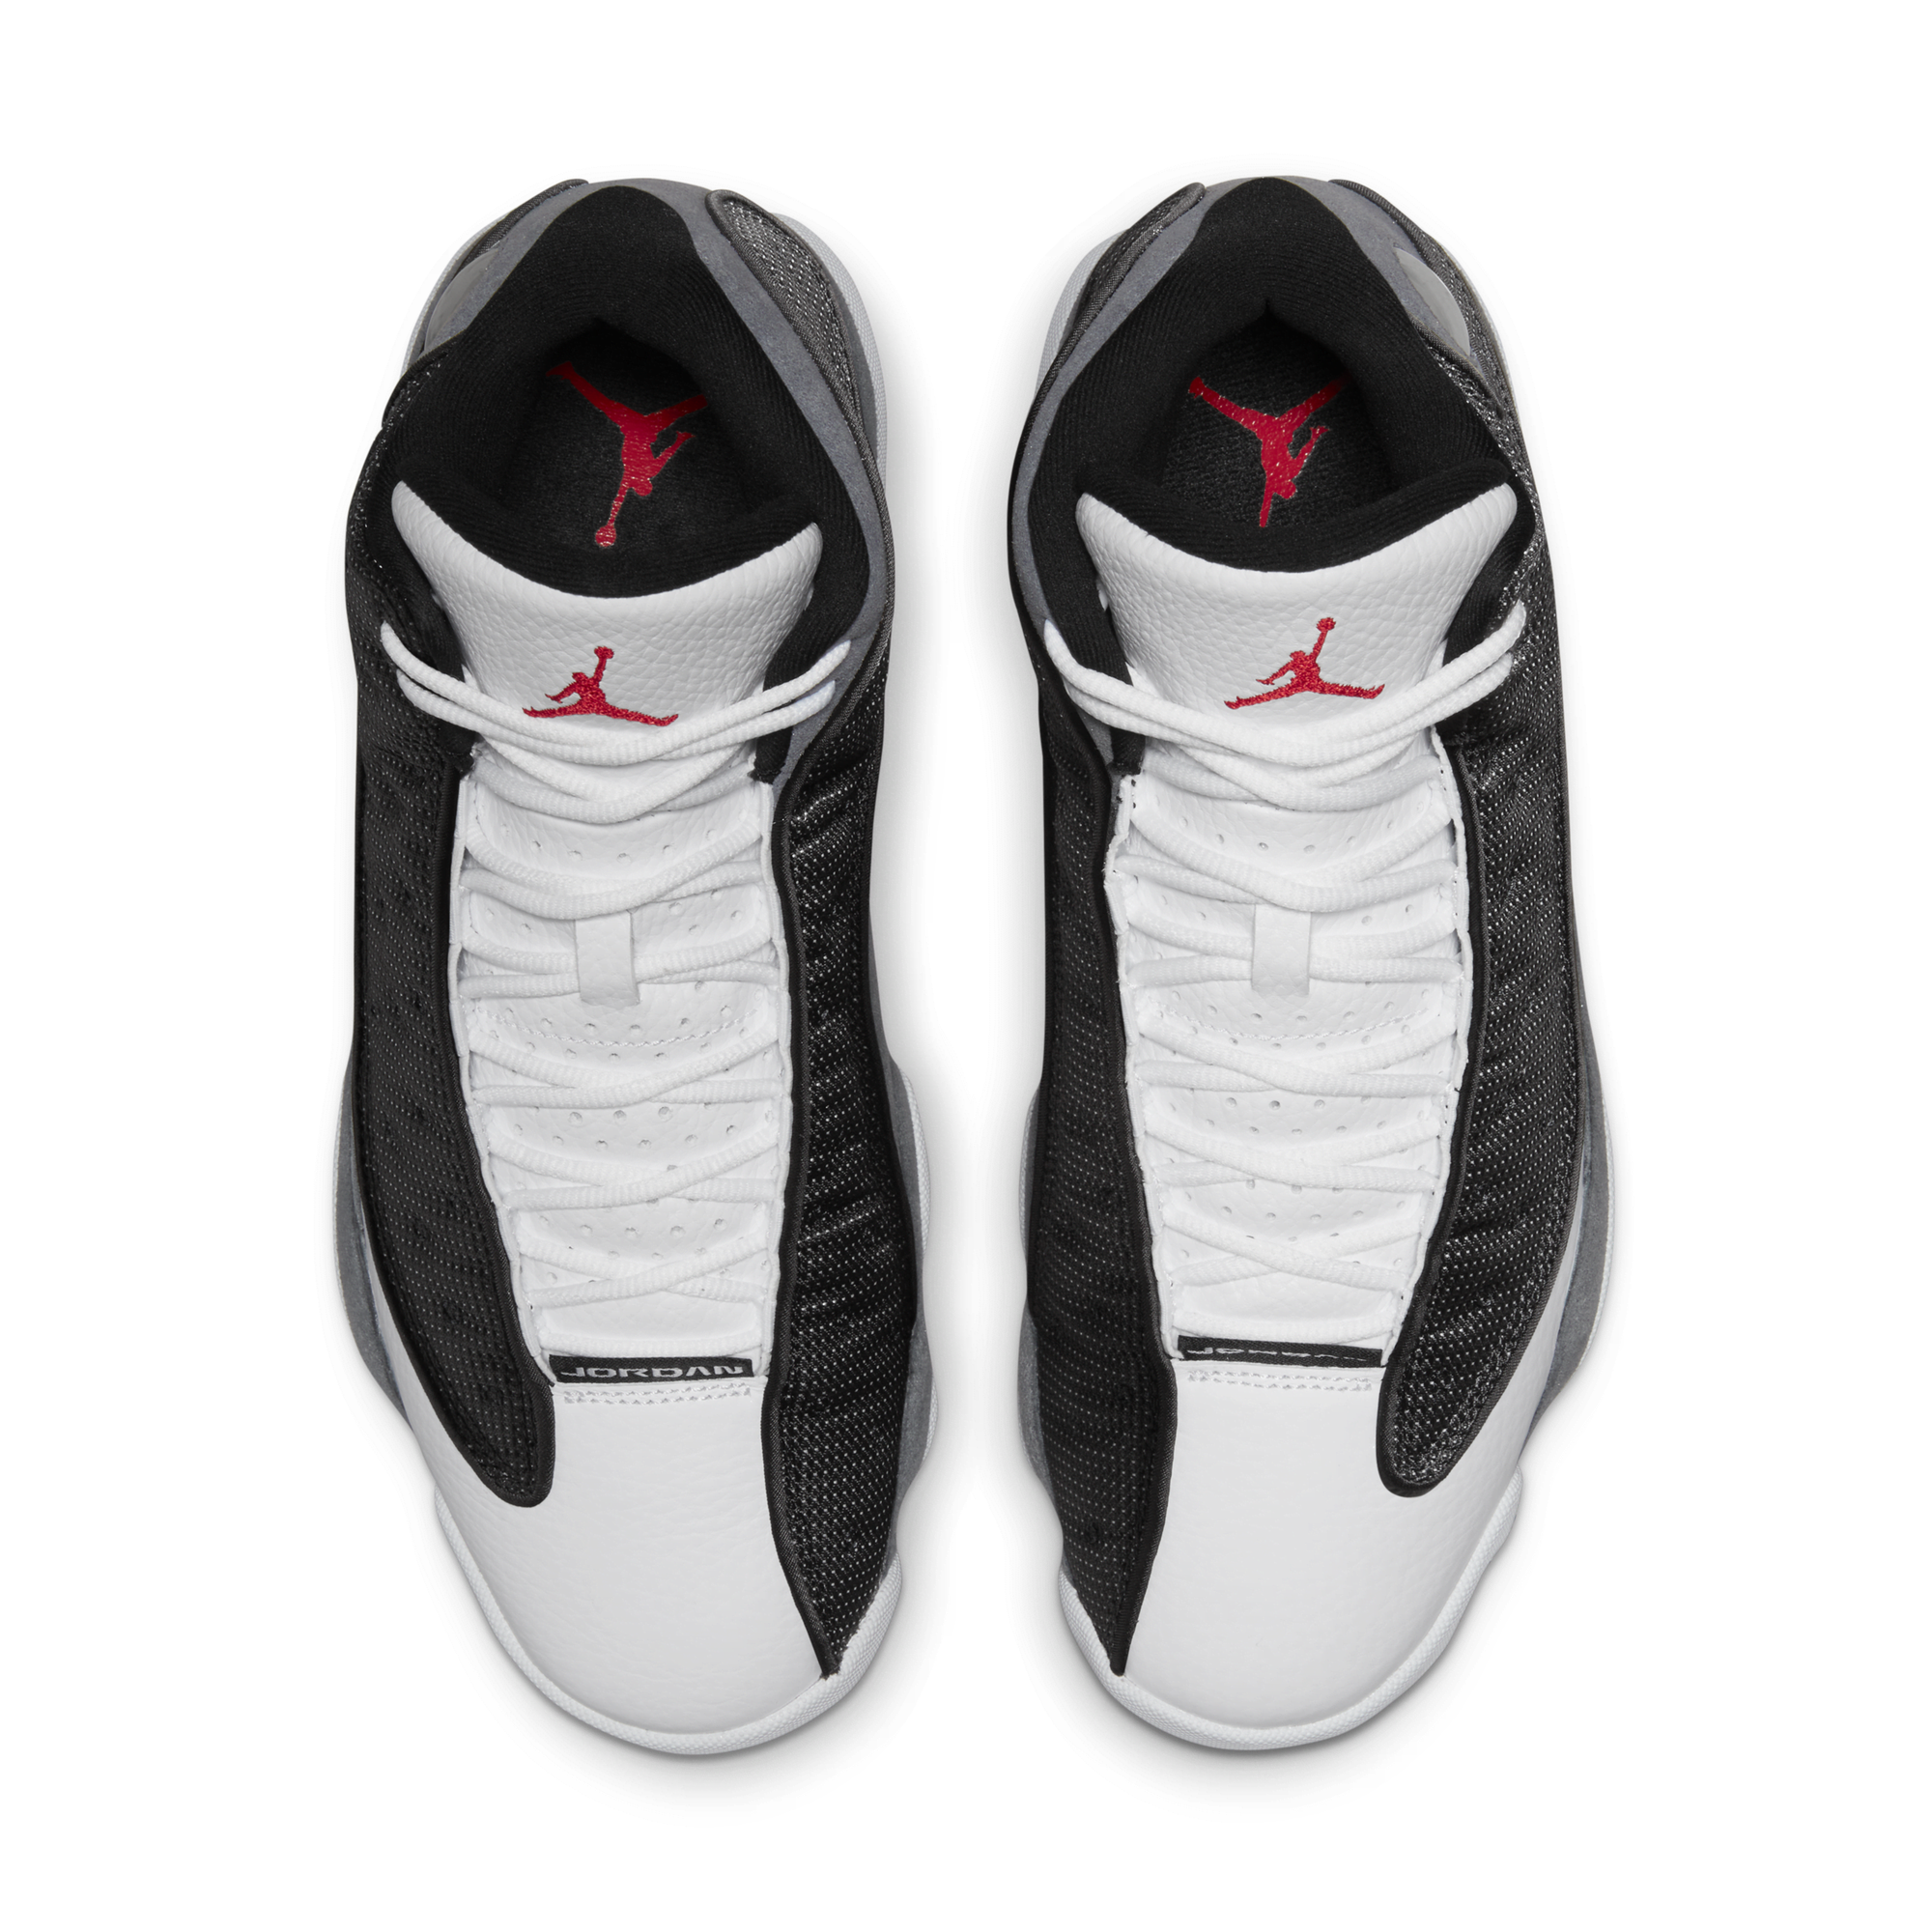 Sneakers Release – Air Jordan 13 Retro “Playoffs”  Men’s and Kids’ Colorway Launching 2/18